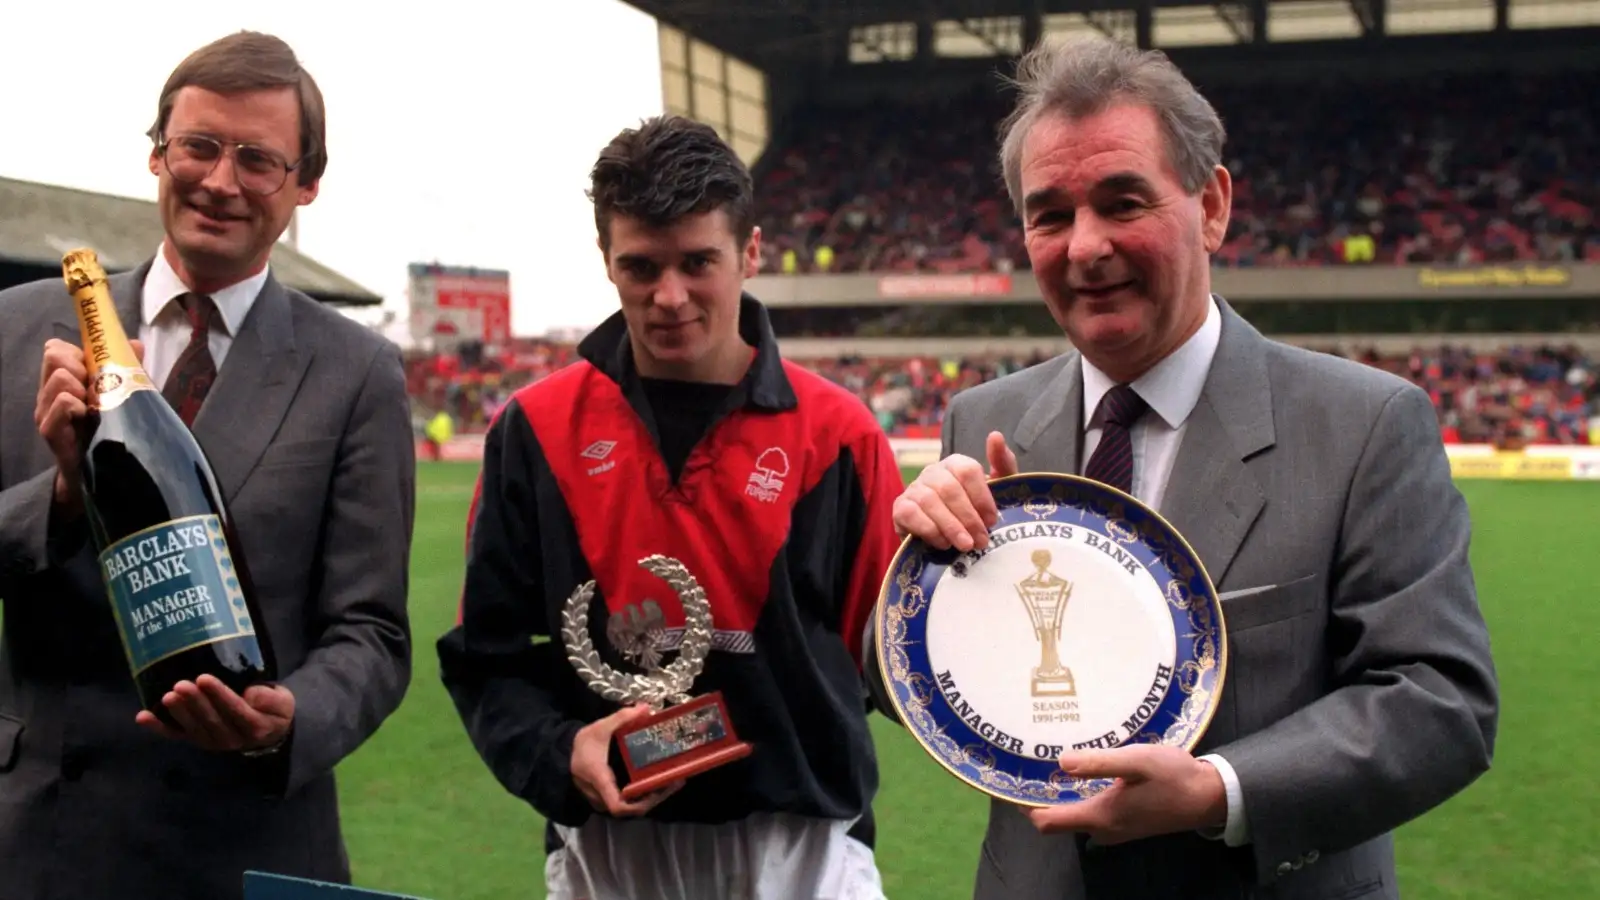 An ode to the Brian Clough punch that sealed Roy Keane’s devotion